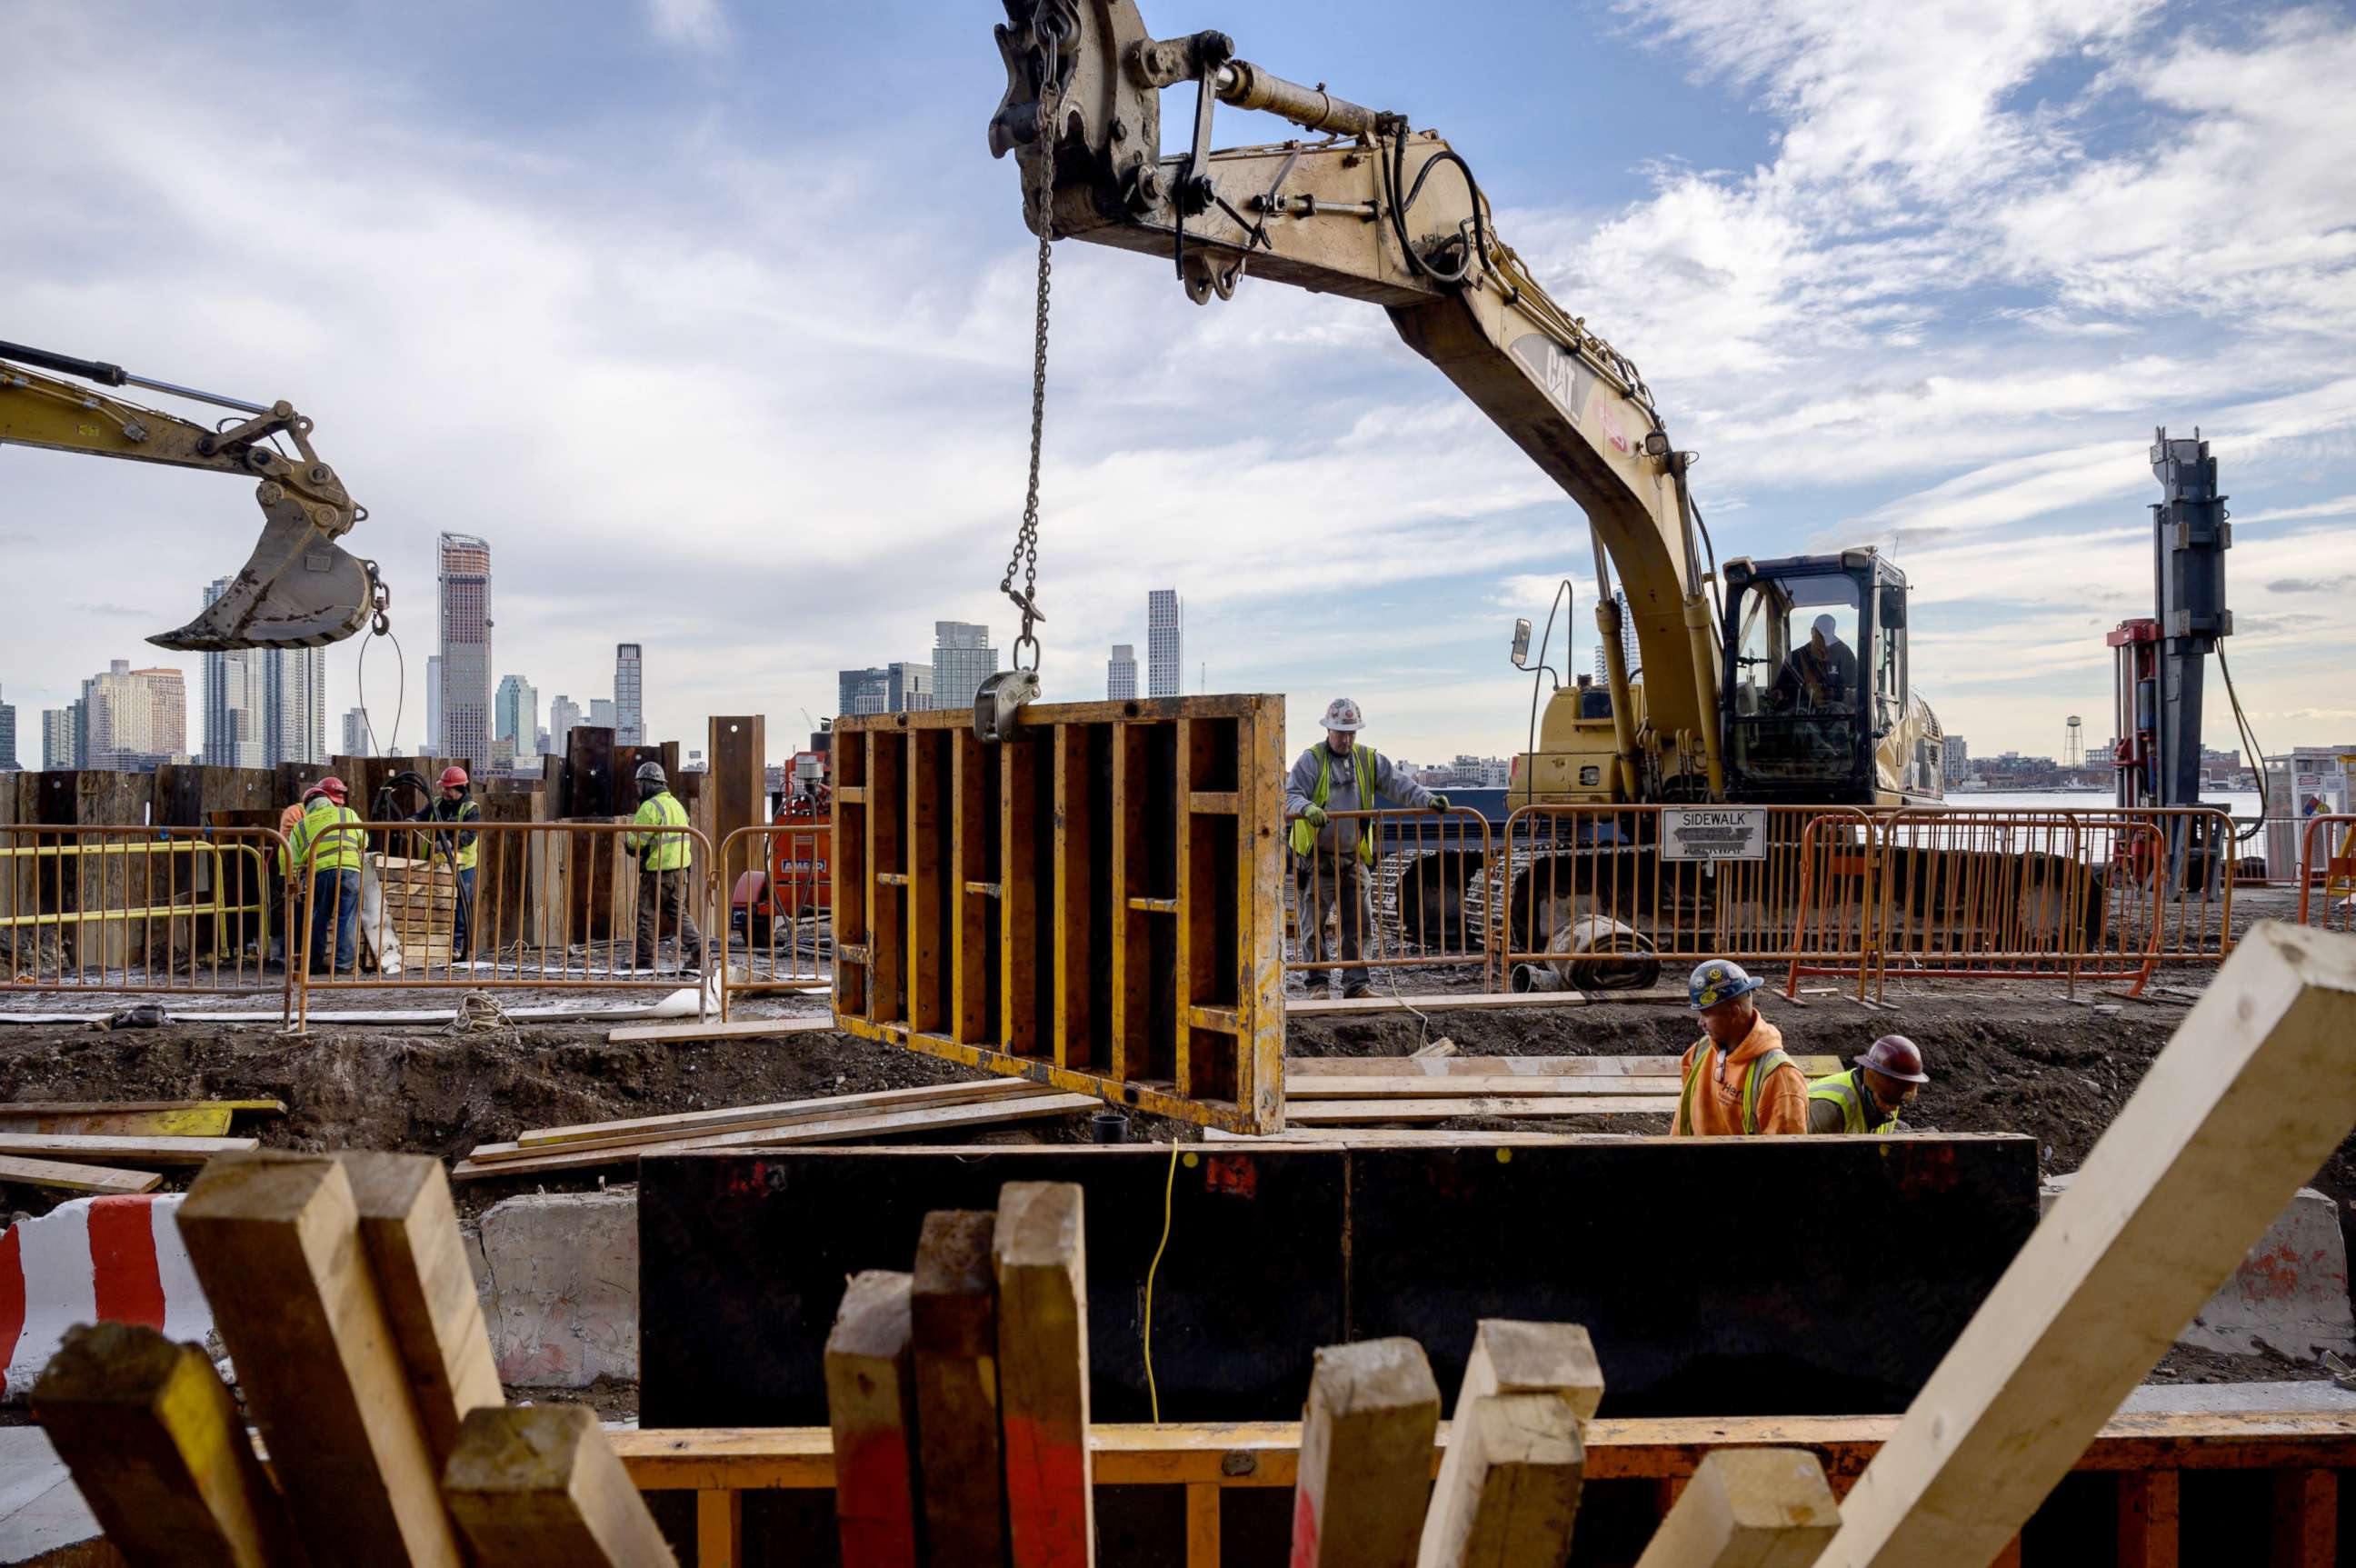 PHOTO: A general view shows contruction workers at the site of a flood defense project on the east side of Manhattan, New York city, Dec. 11, 2021.